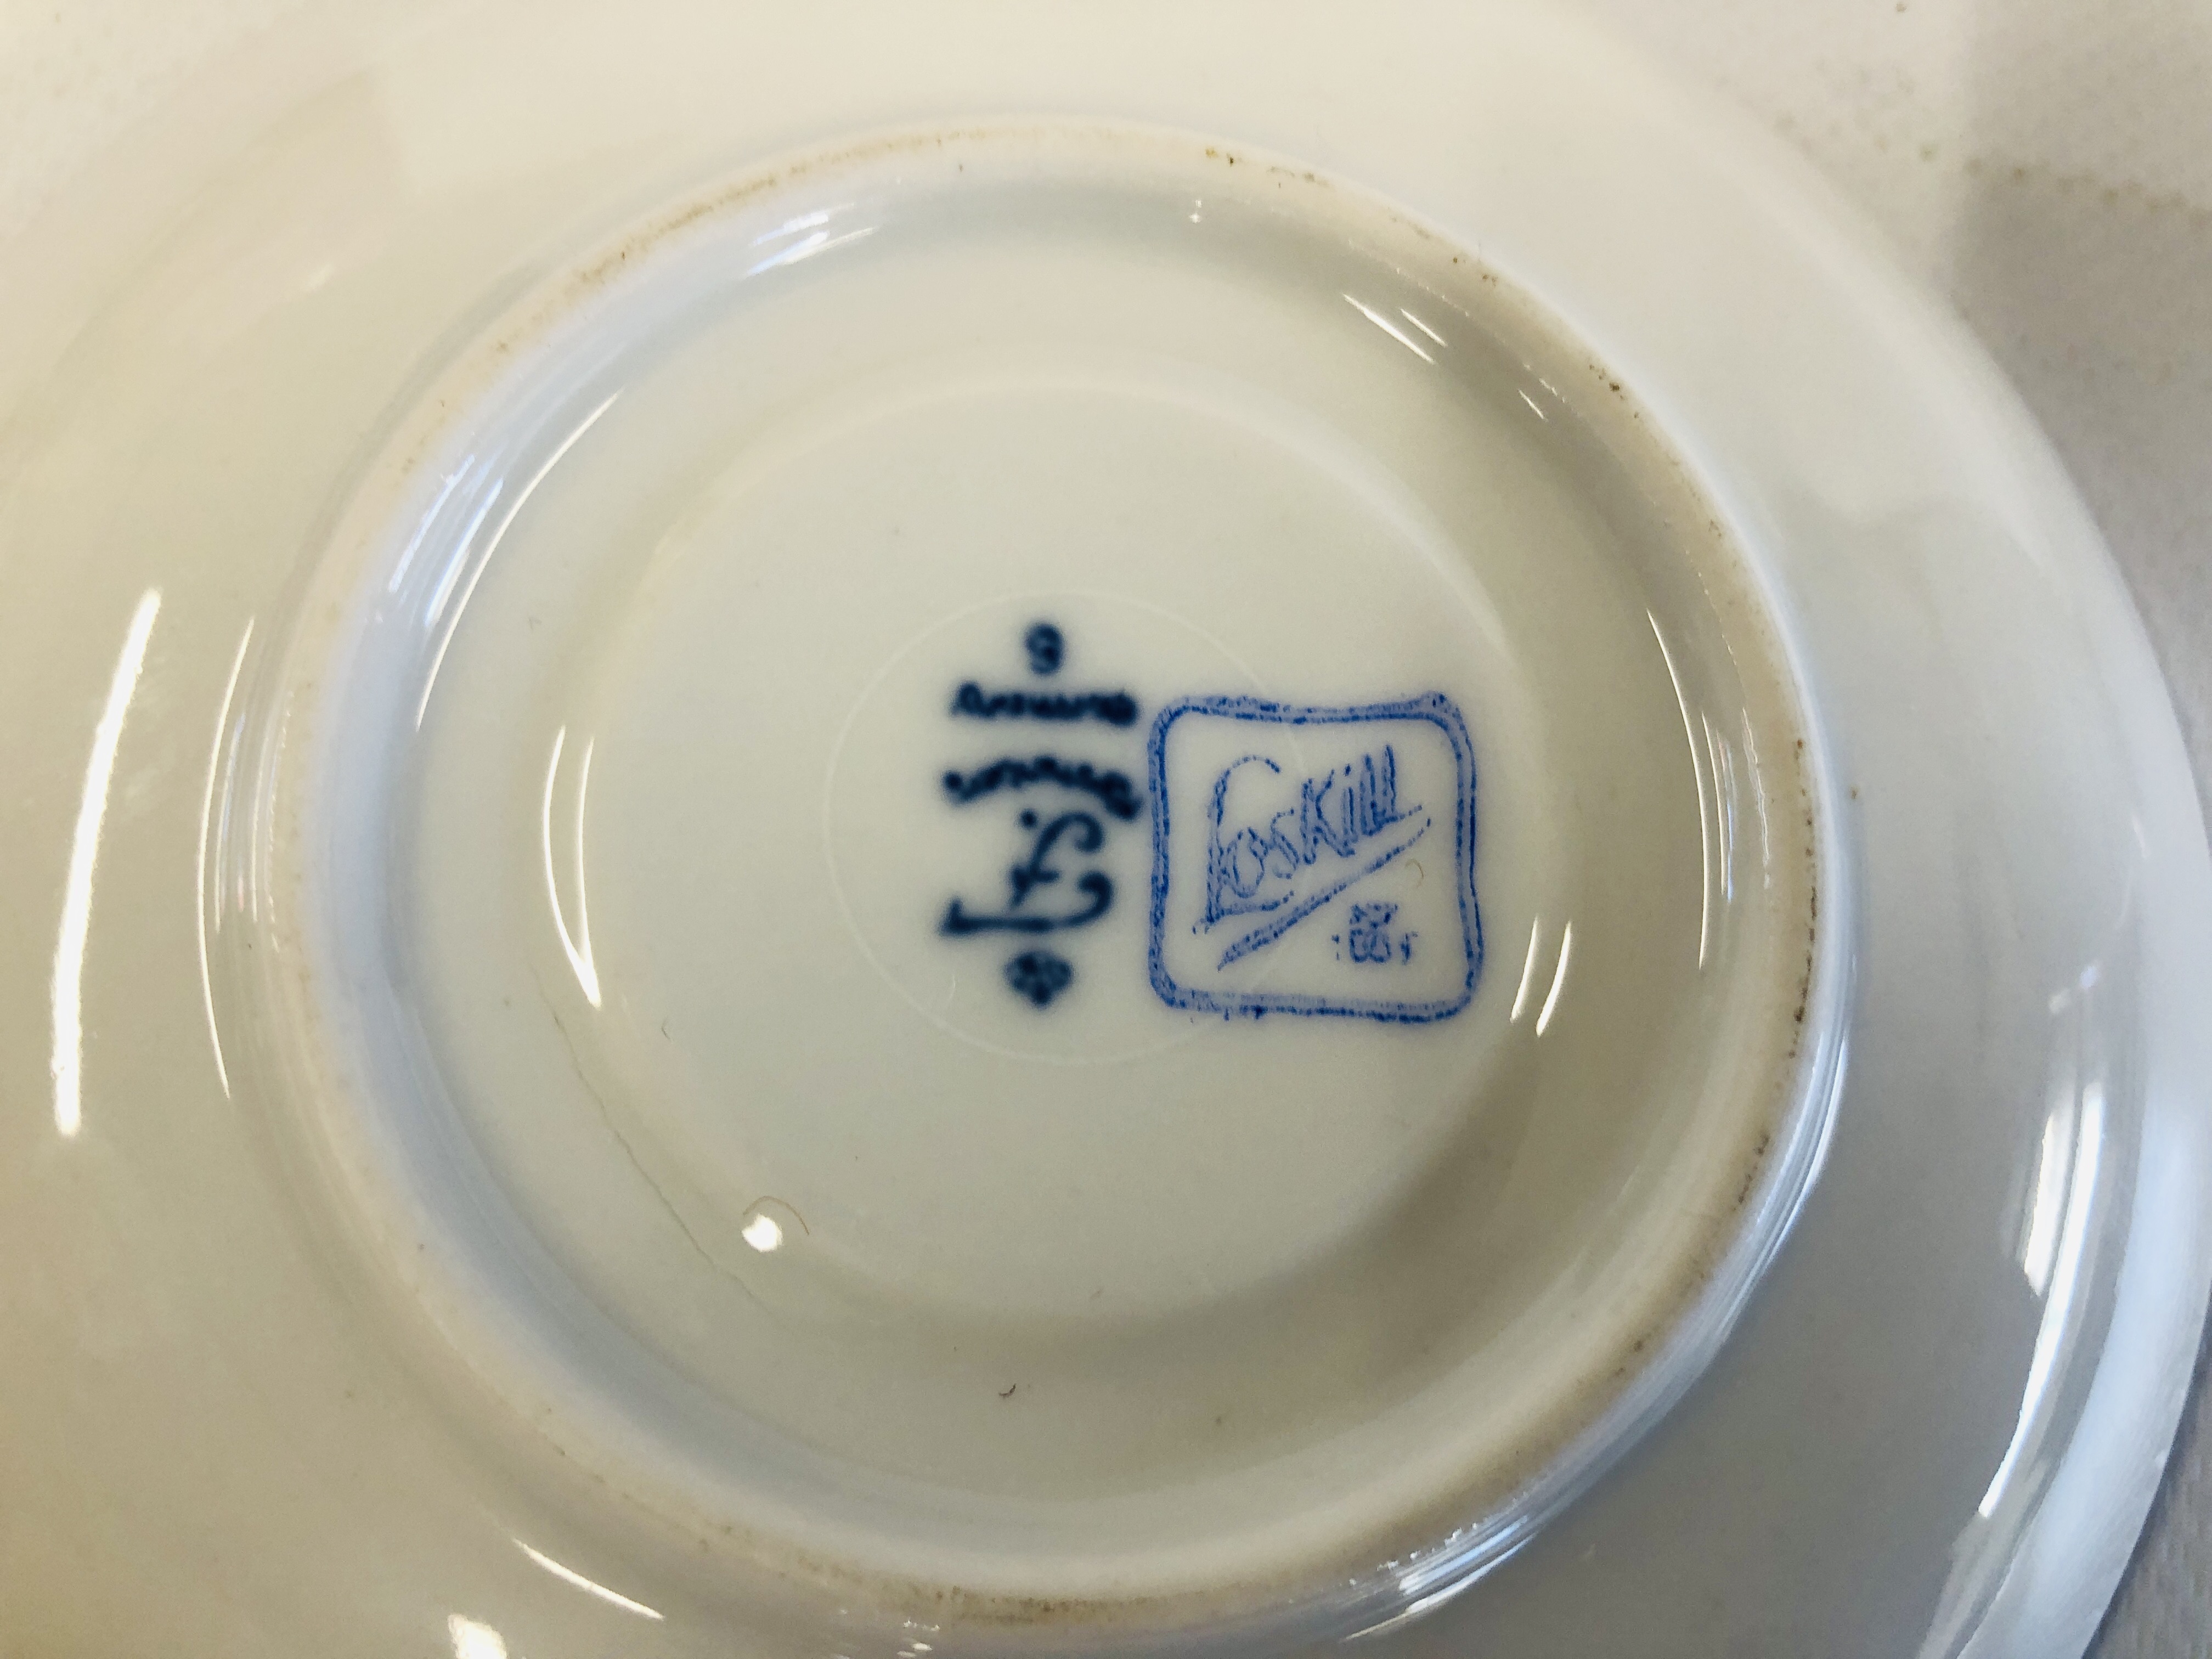 A NANKING CARGO ORIENTAL BLUE & WHITE TEA BOWL AND SAUCER (CHRISTIES 5066) ALONG WITH A LASKILL, - Image 8 of 8